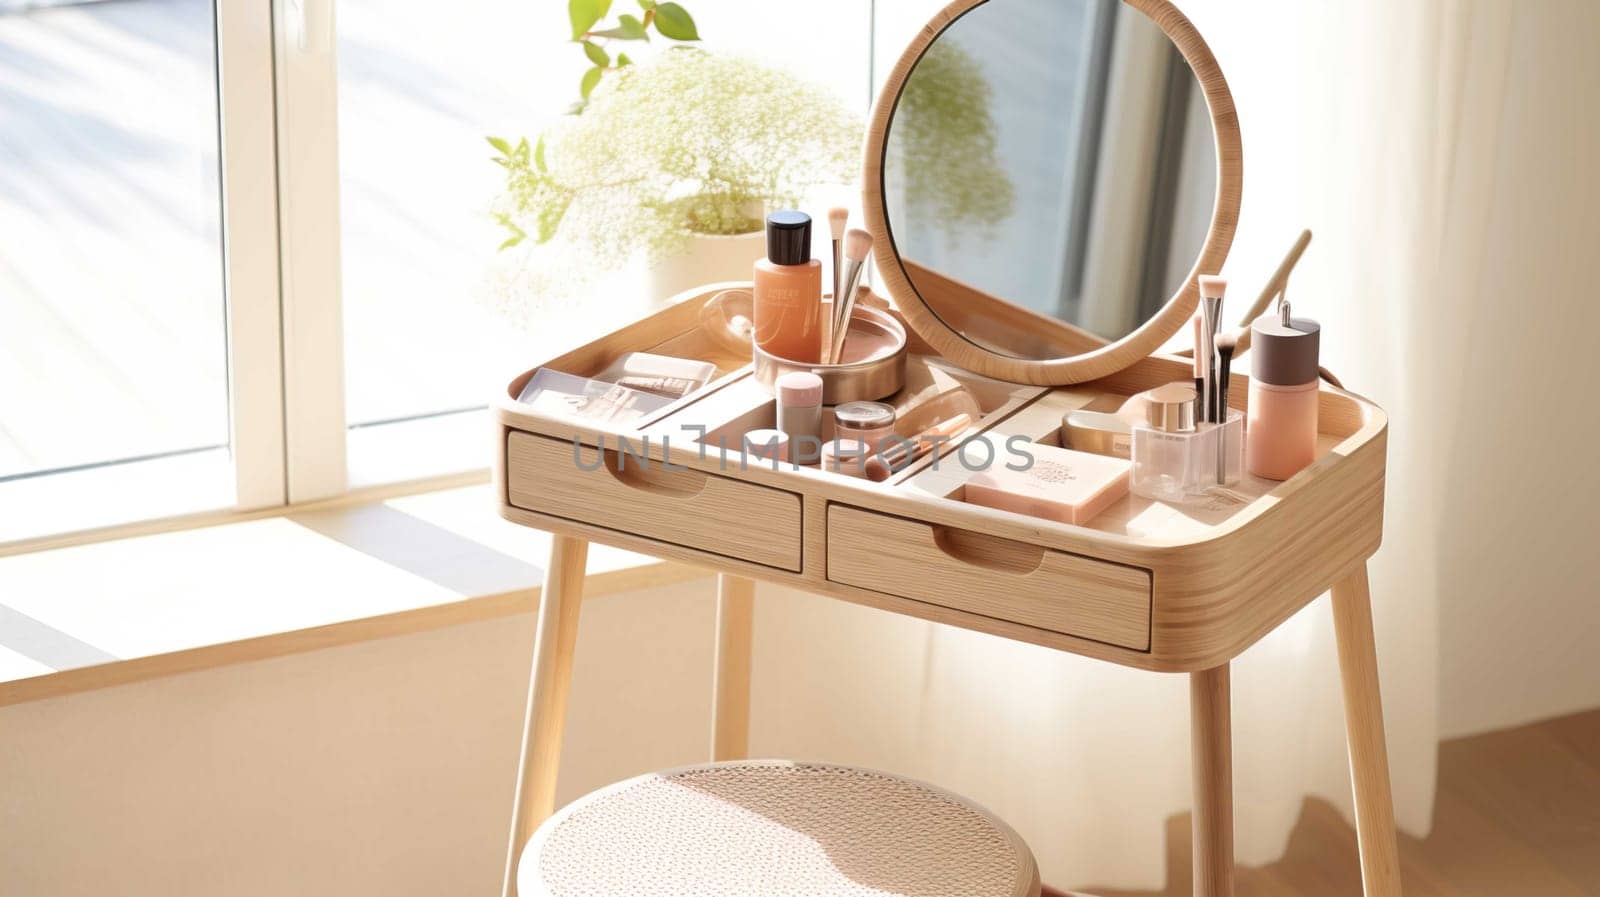 A stylish rattan wooden dressing table in sunlight, with the drawer ajar. Various beauty products , Generate AI by Mrsongrphc